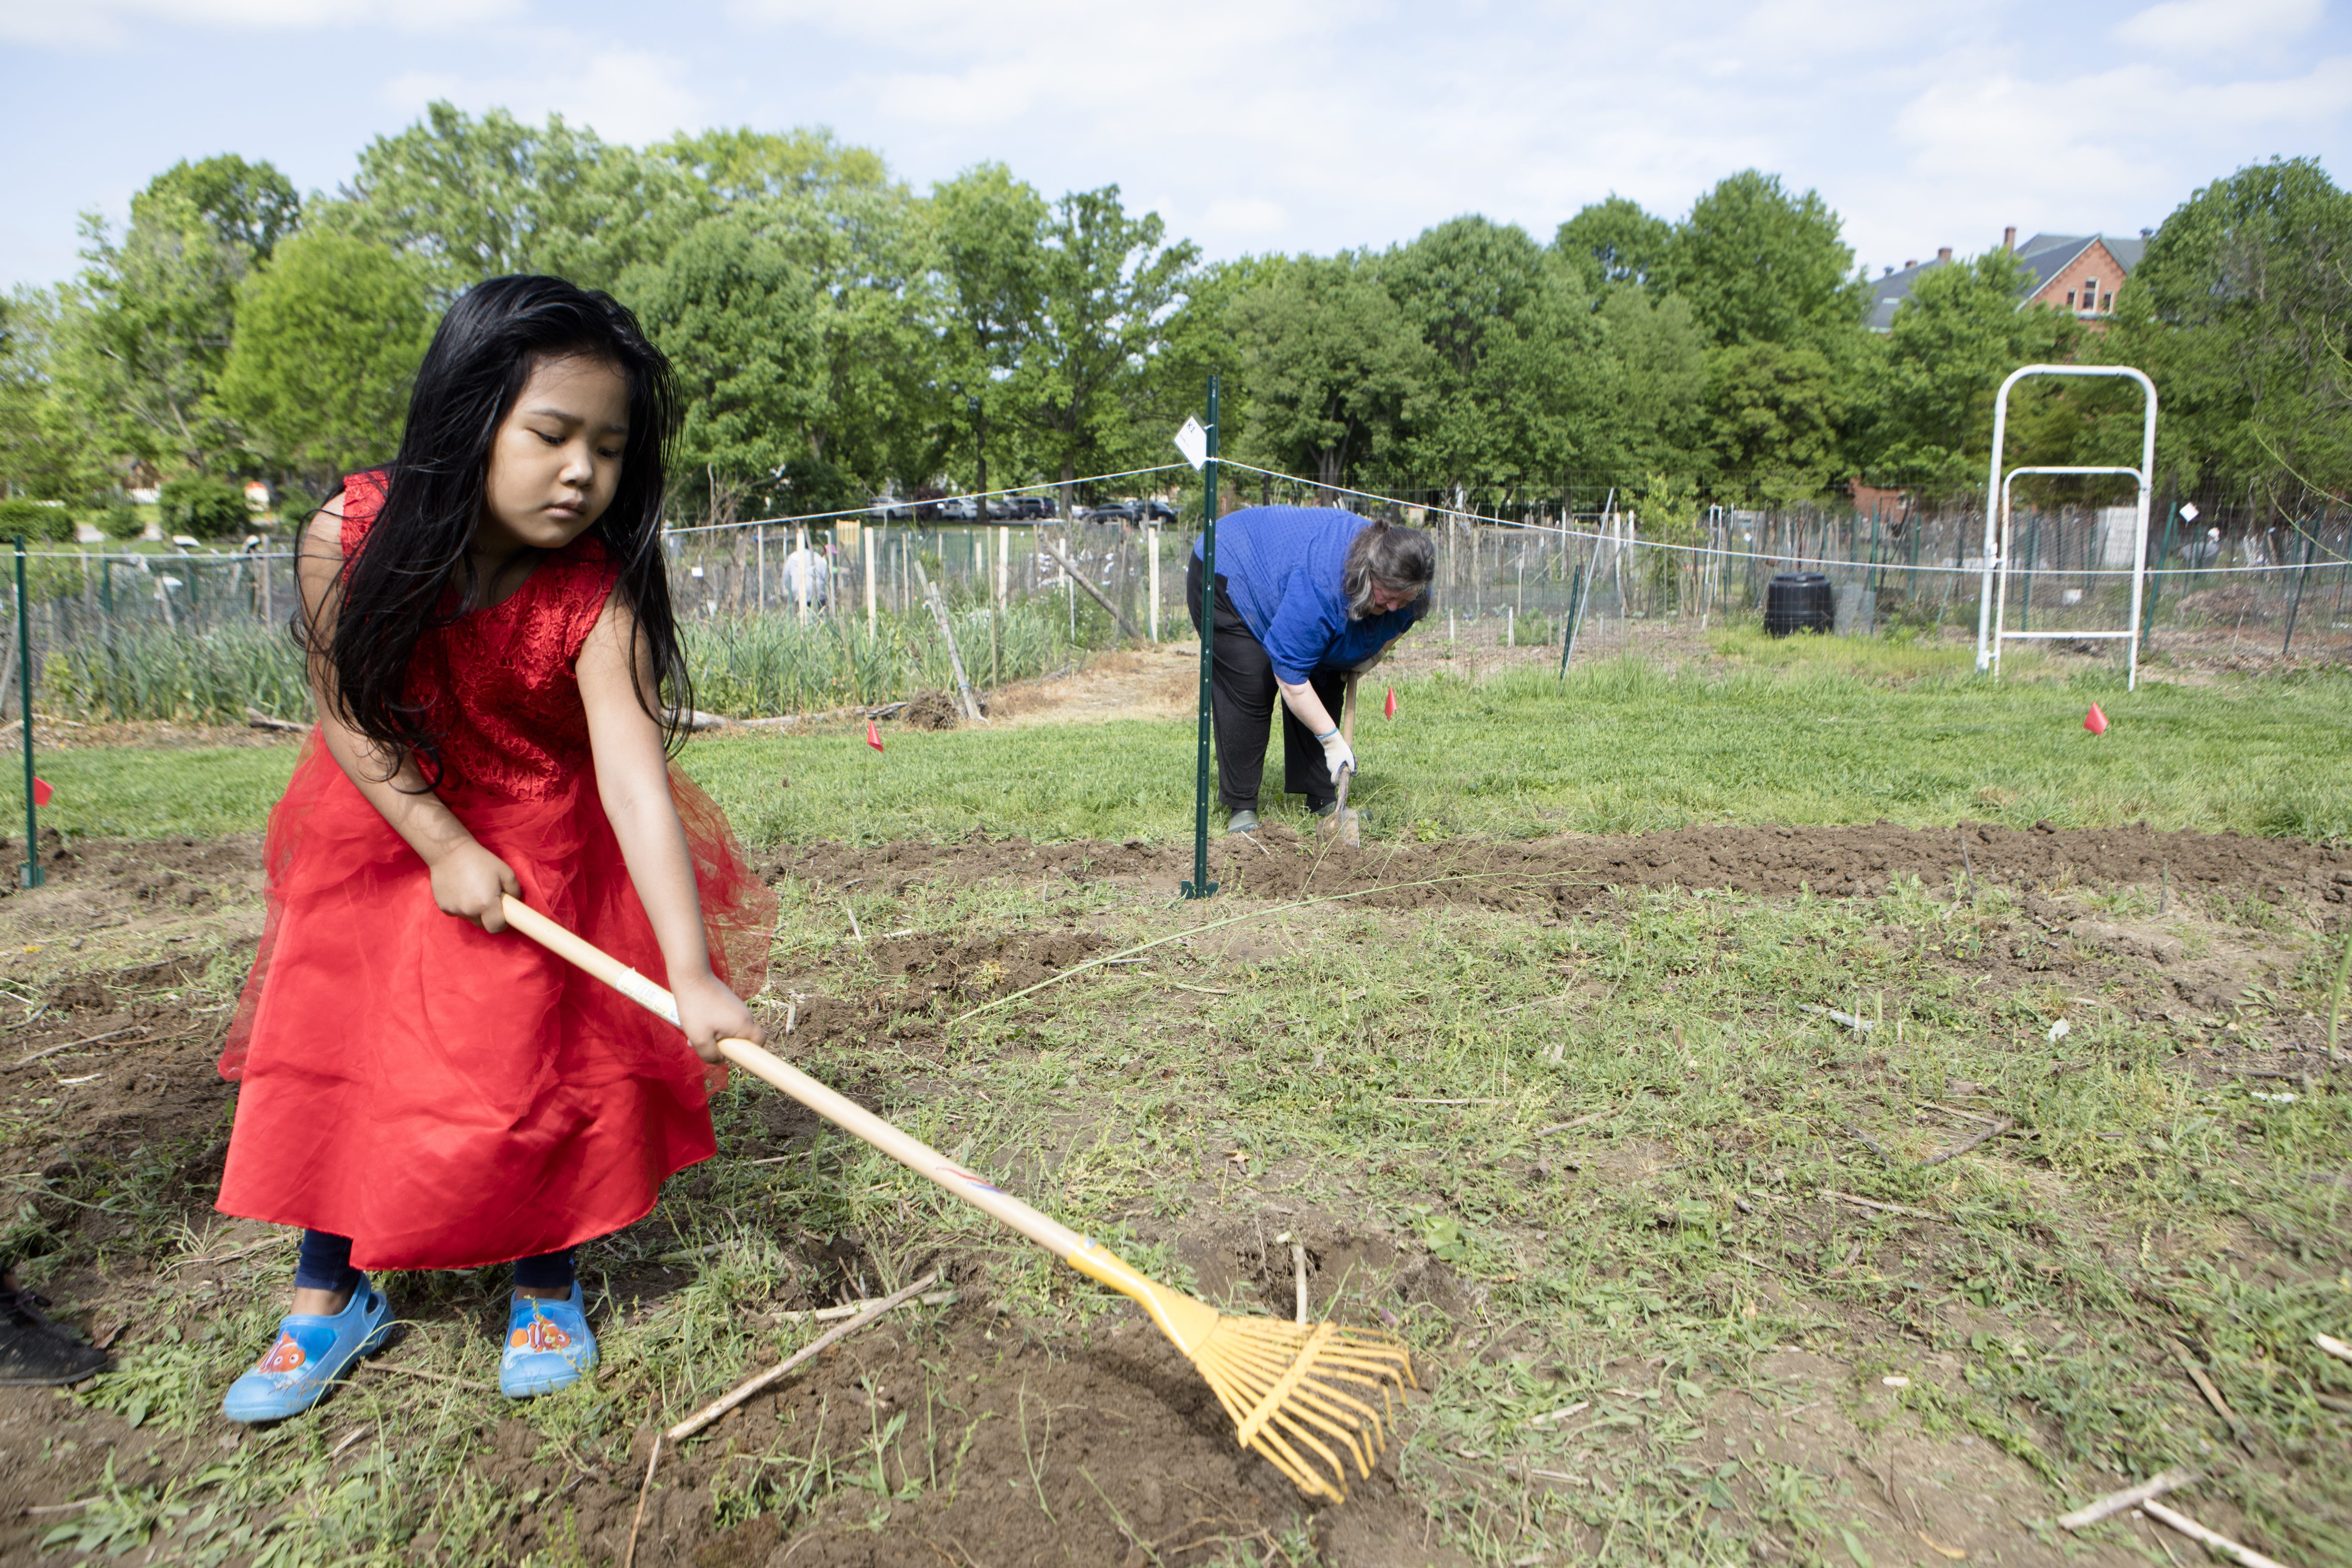 Pratisma Tamang, 4, rakes the dirt at the community garden. She is part of a family that grows food on several of the plots at St. Clare Convent in Hartwell.